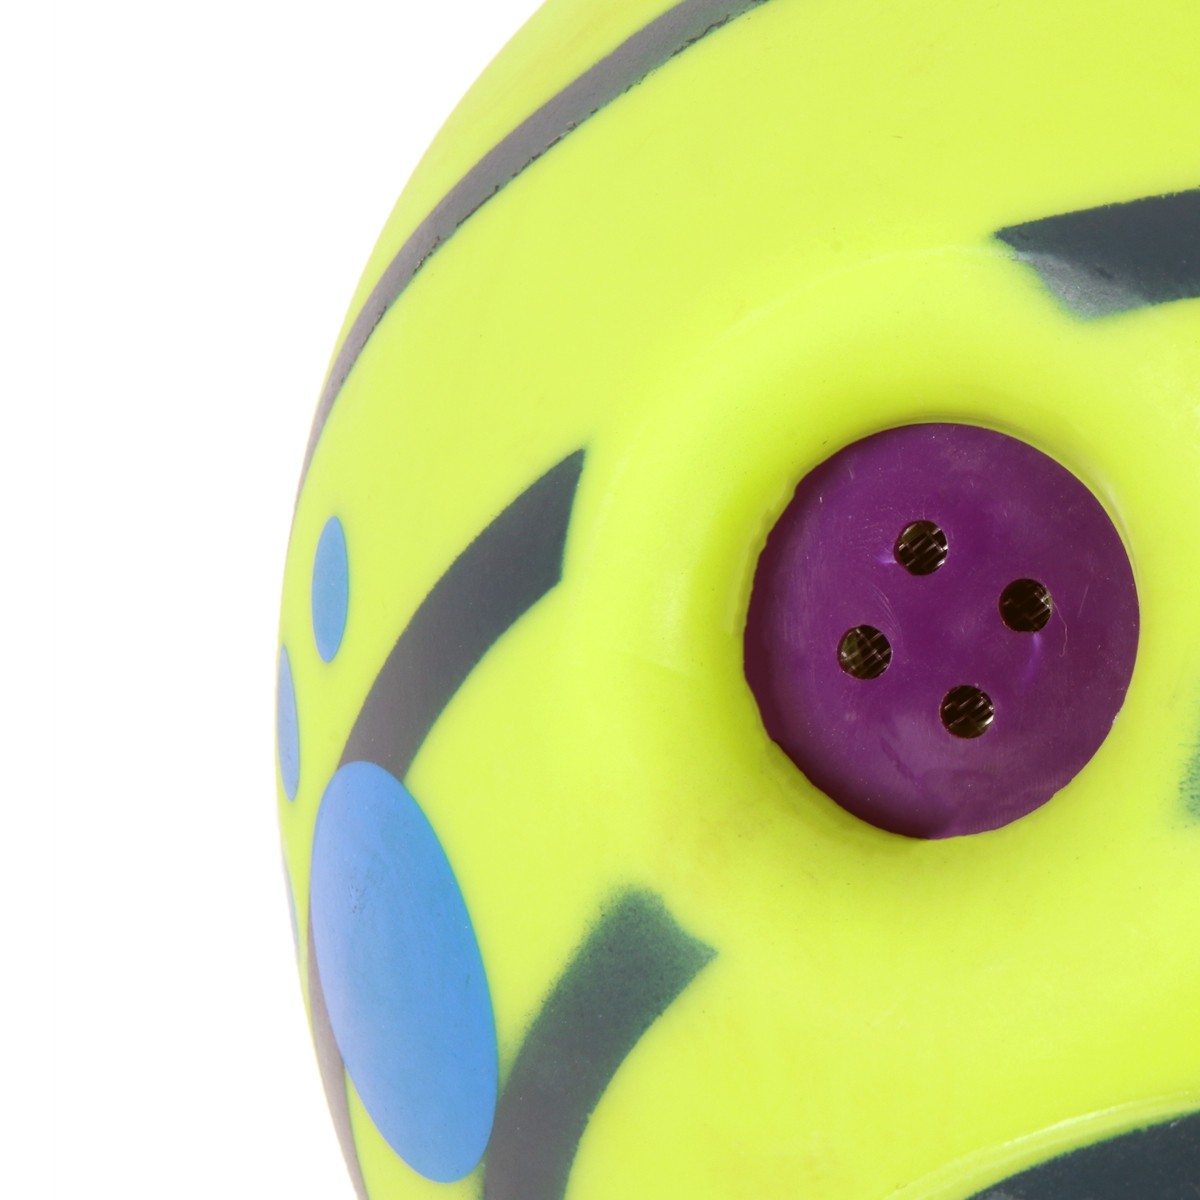 Balle sonore pour chien Zolia Woopy Ball